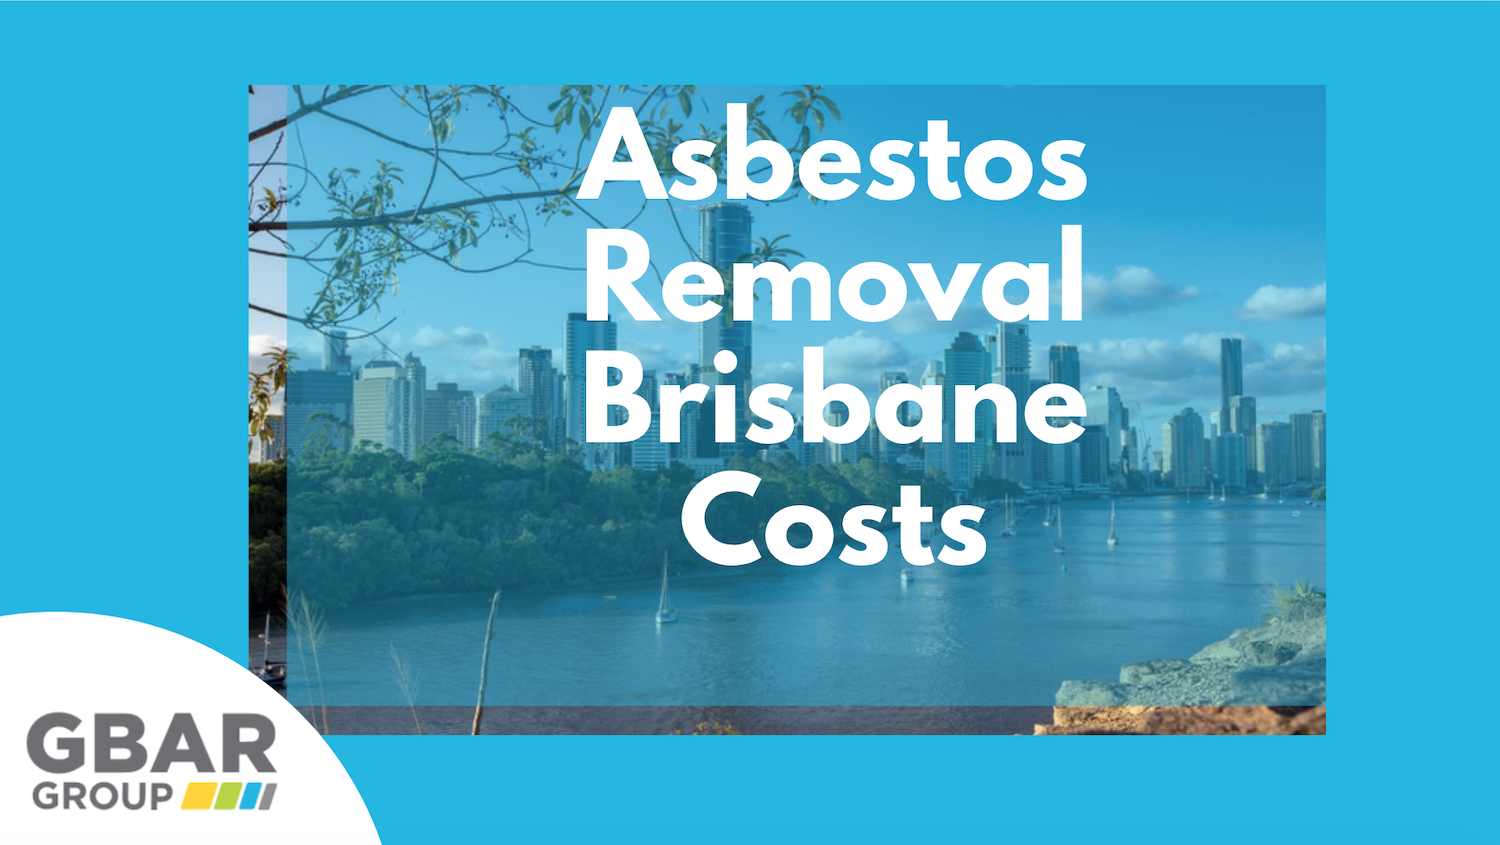 How Much Does Asbestos Removal Brisbane Cost Gbar Group,How To Make An Origami Rose